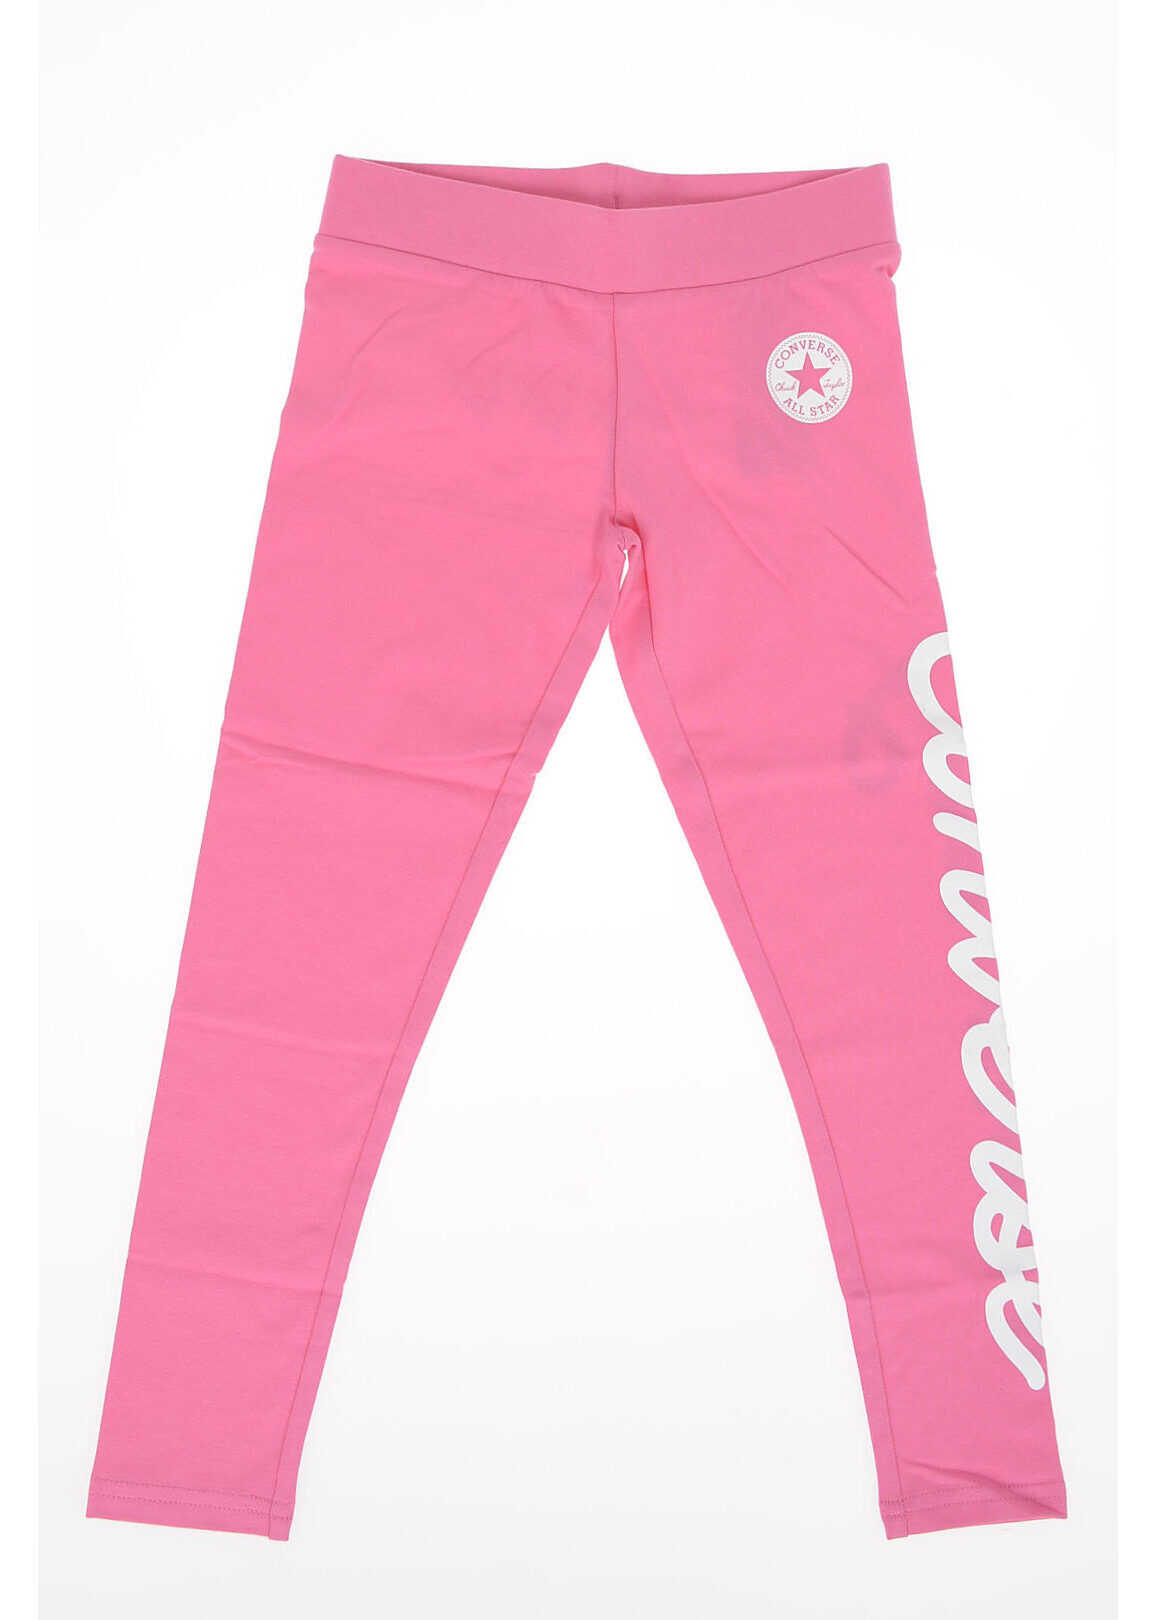 Converse Kids Stretch Pants With Logo Pink image9